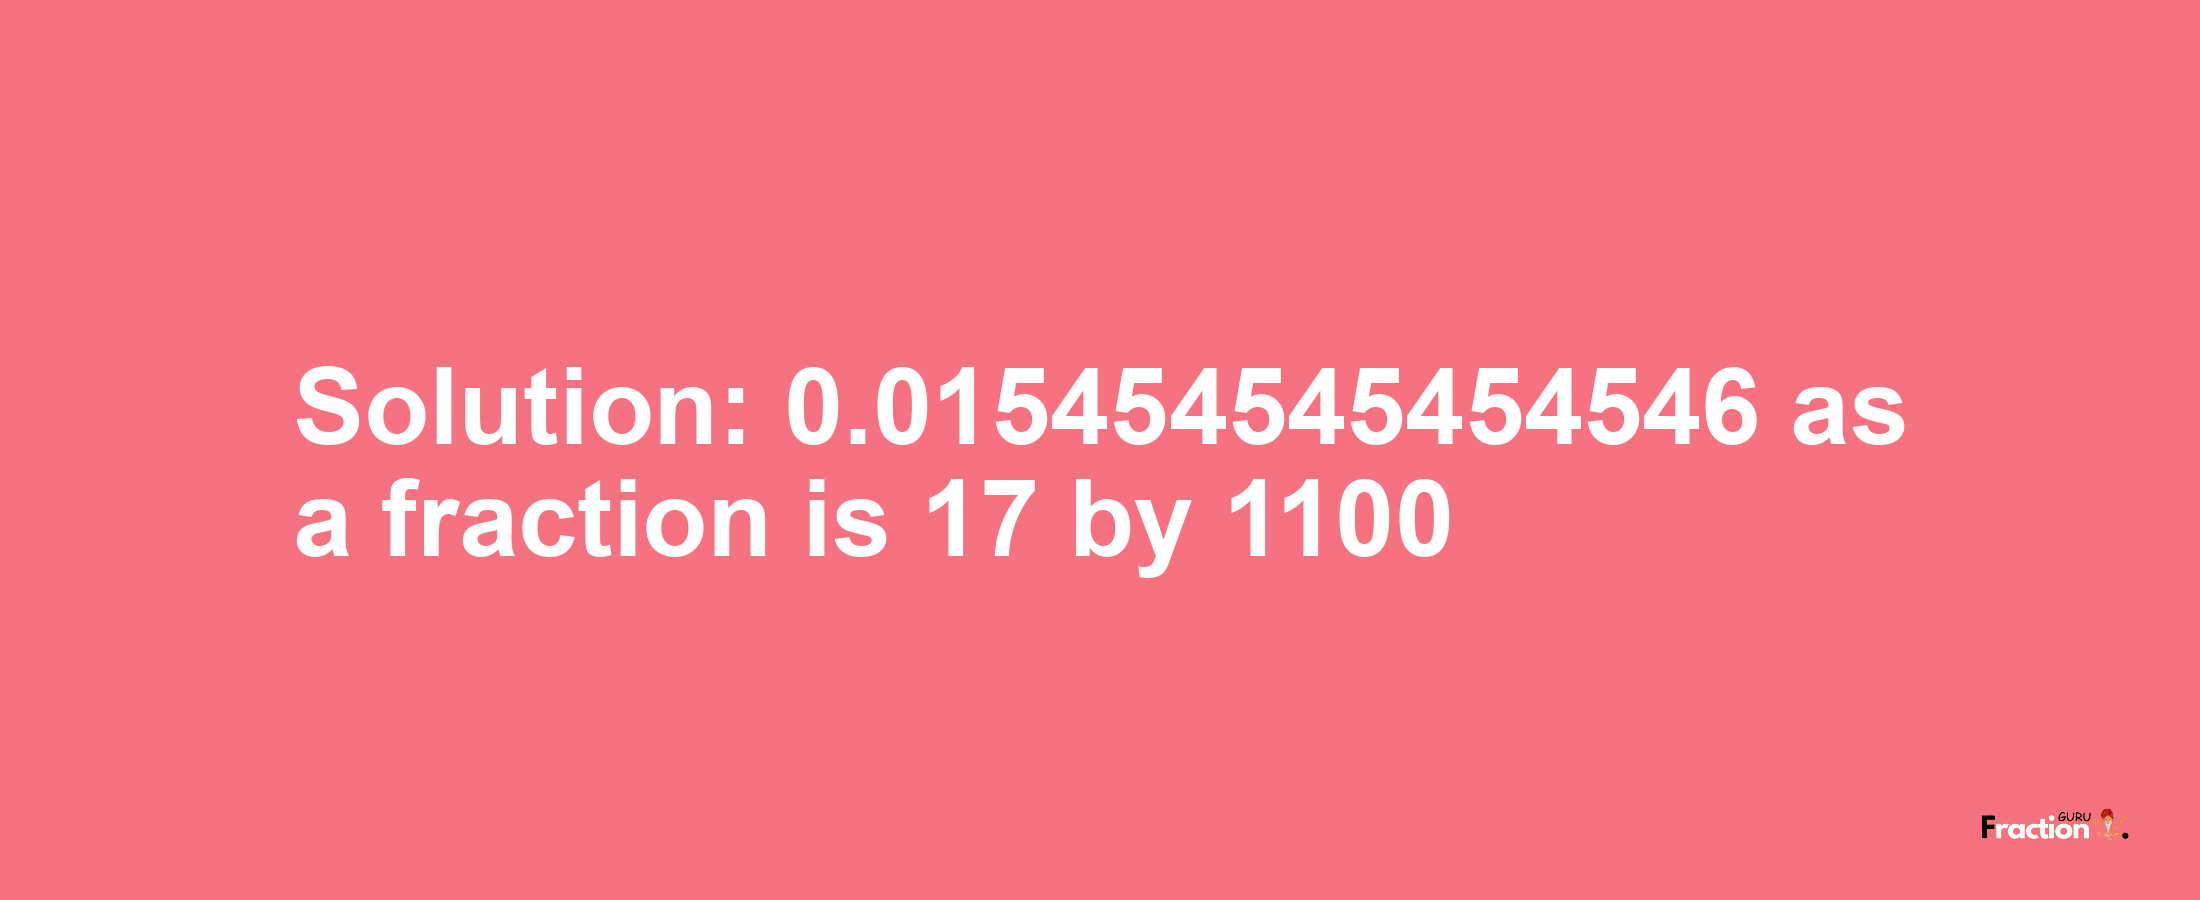 Solution:0.015454545454546 as a fraction is 17/1100